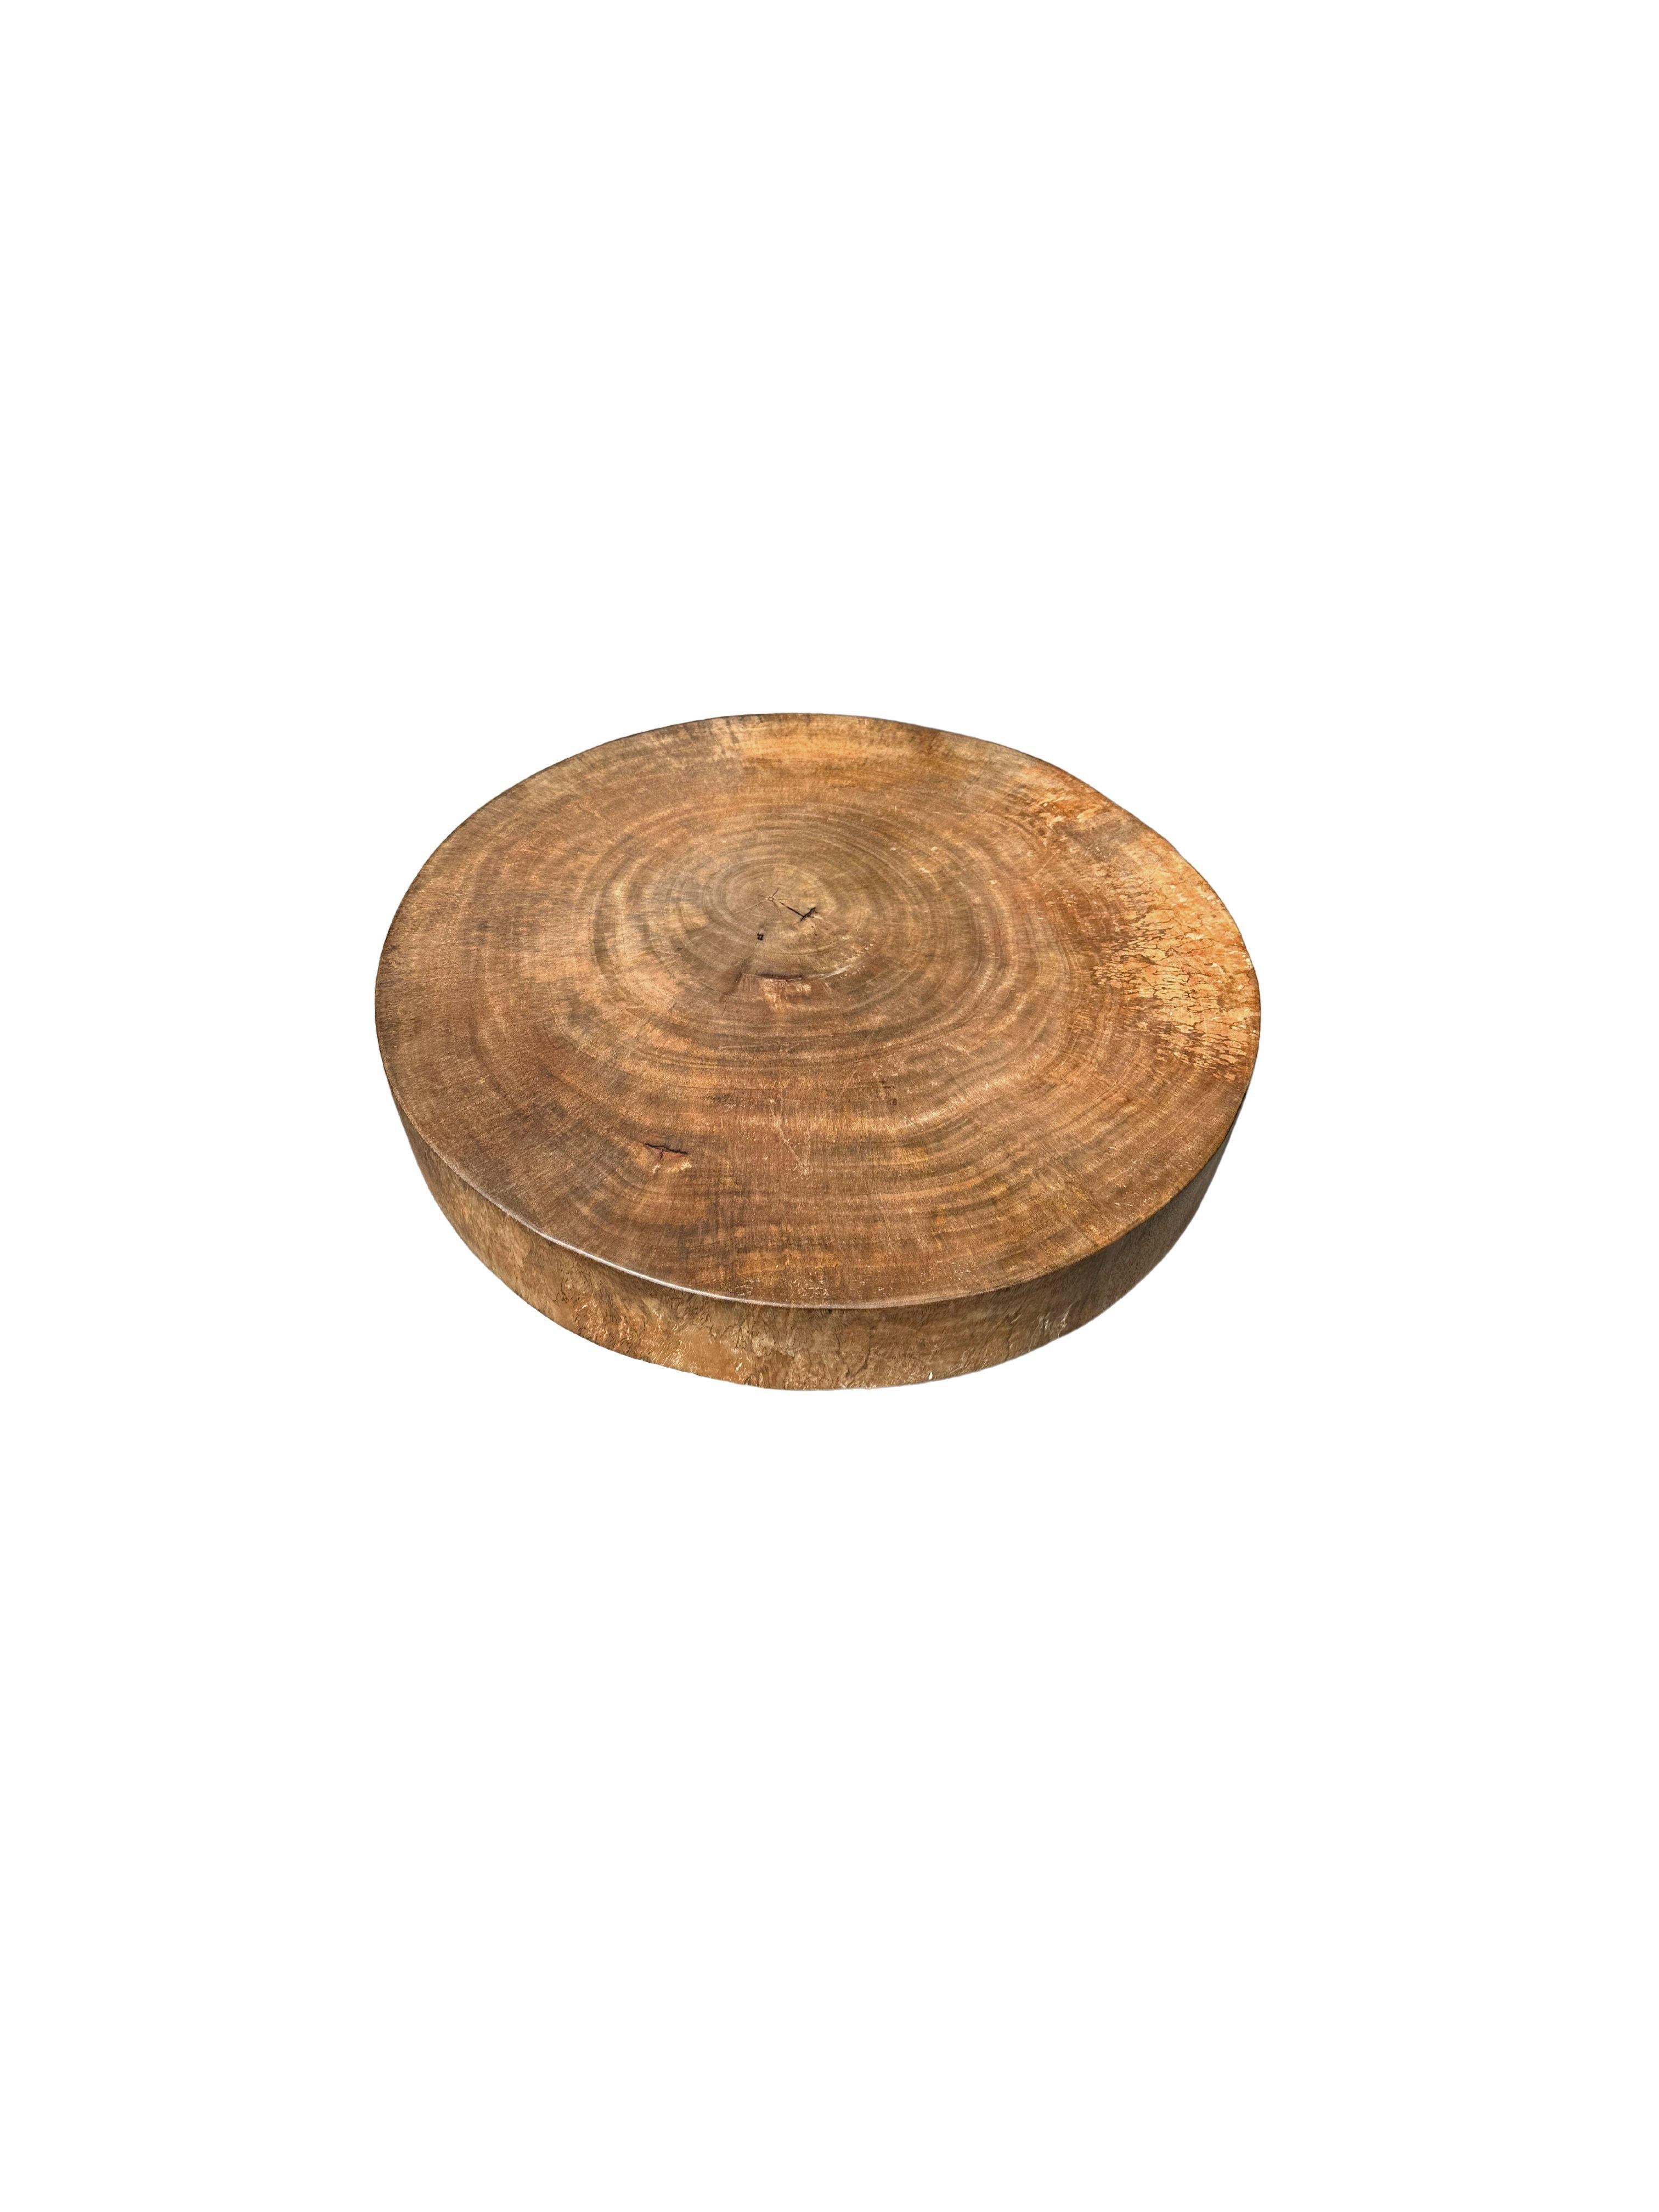 Organic Modern Sculptural Round Table Crafted from Solid Mango Wood, Natural Finish For Sale